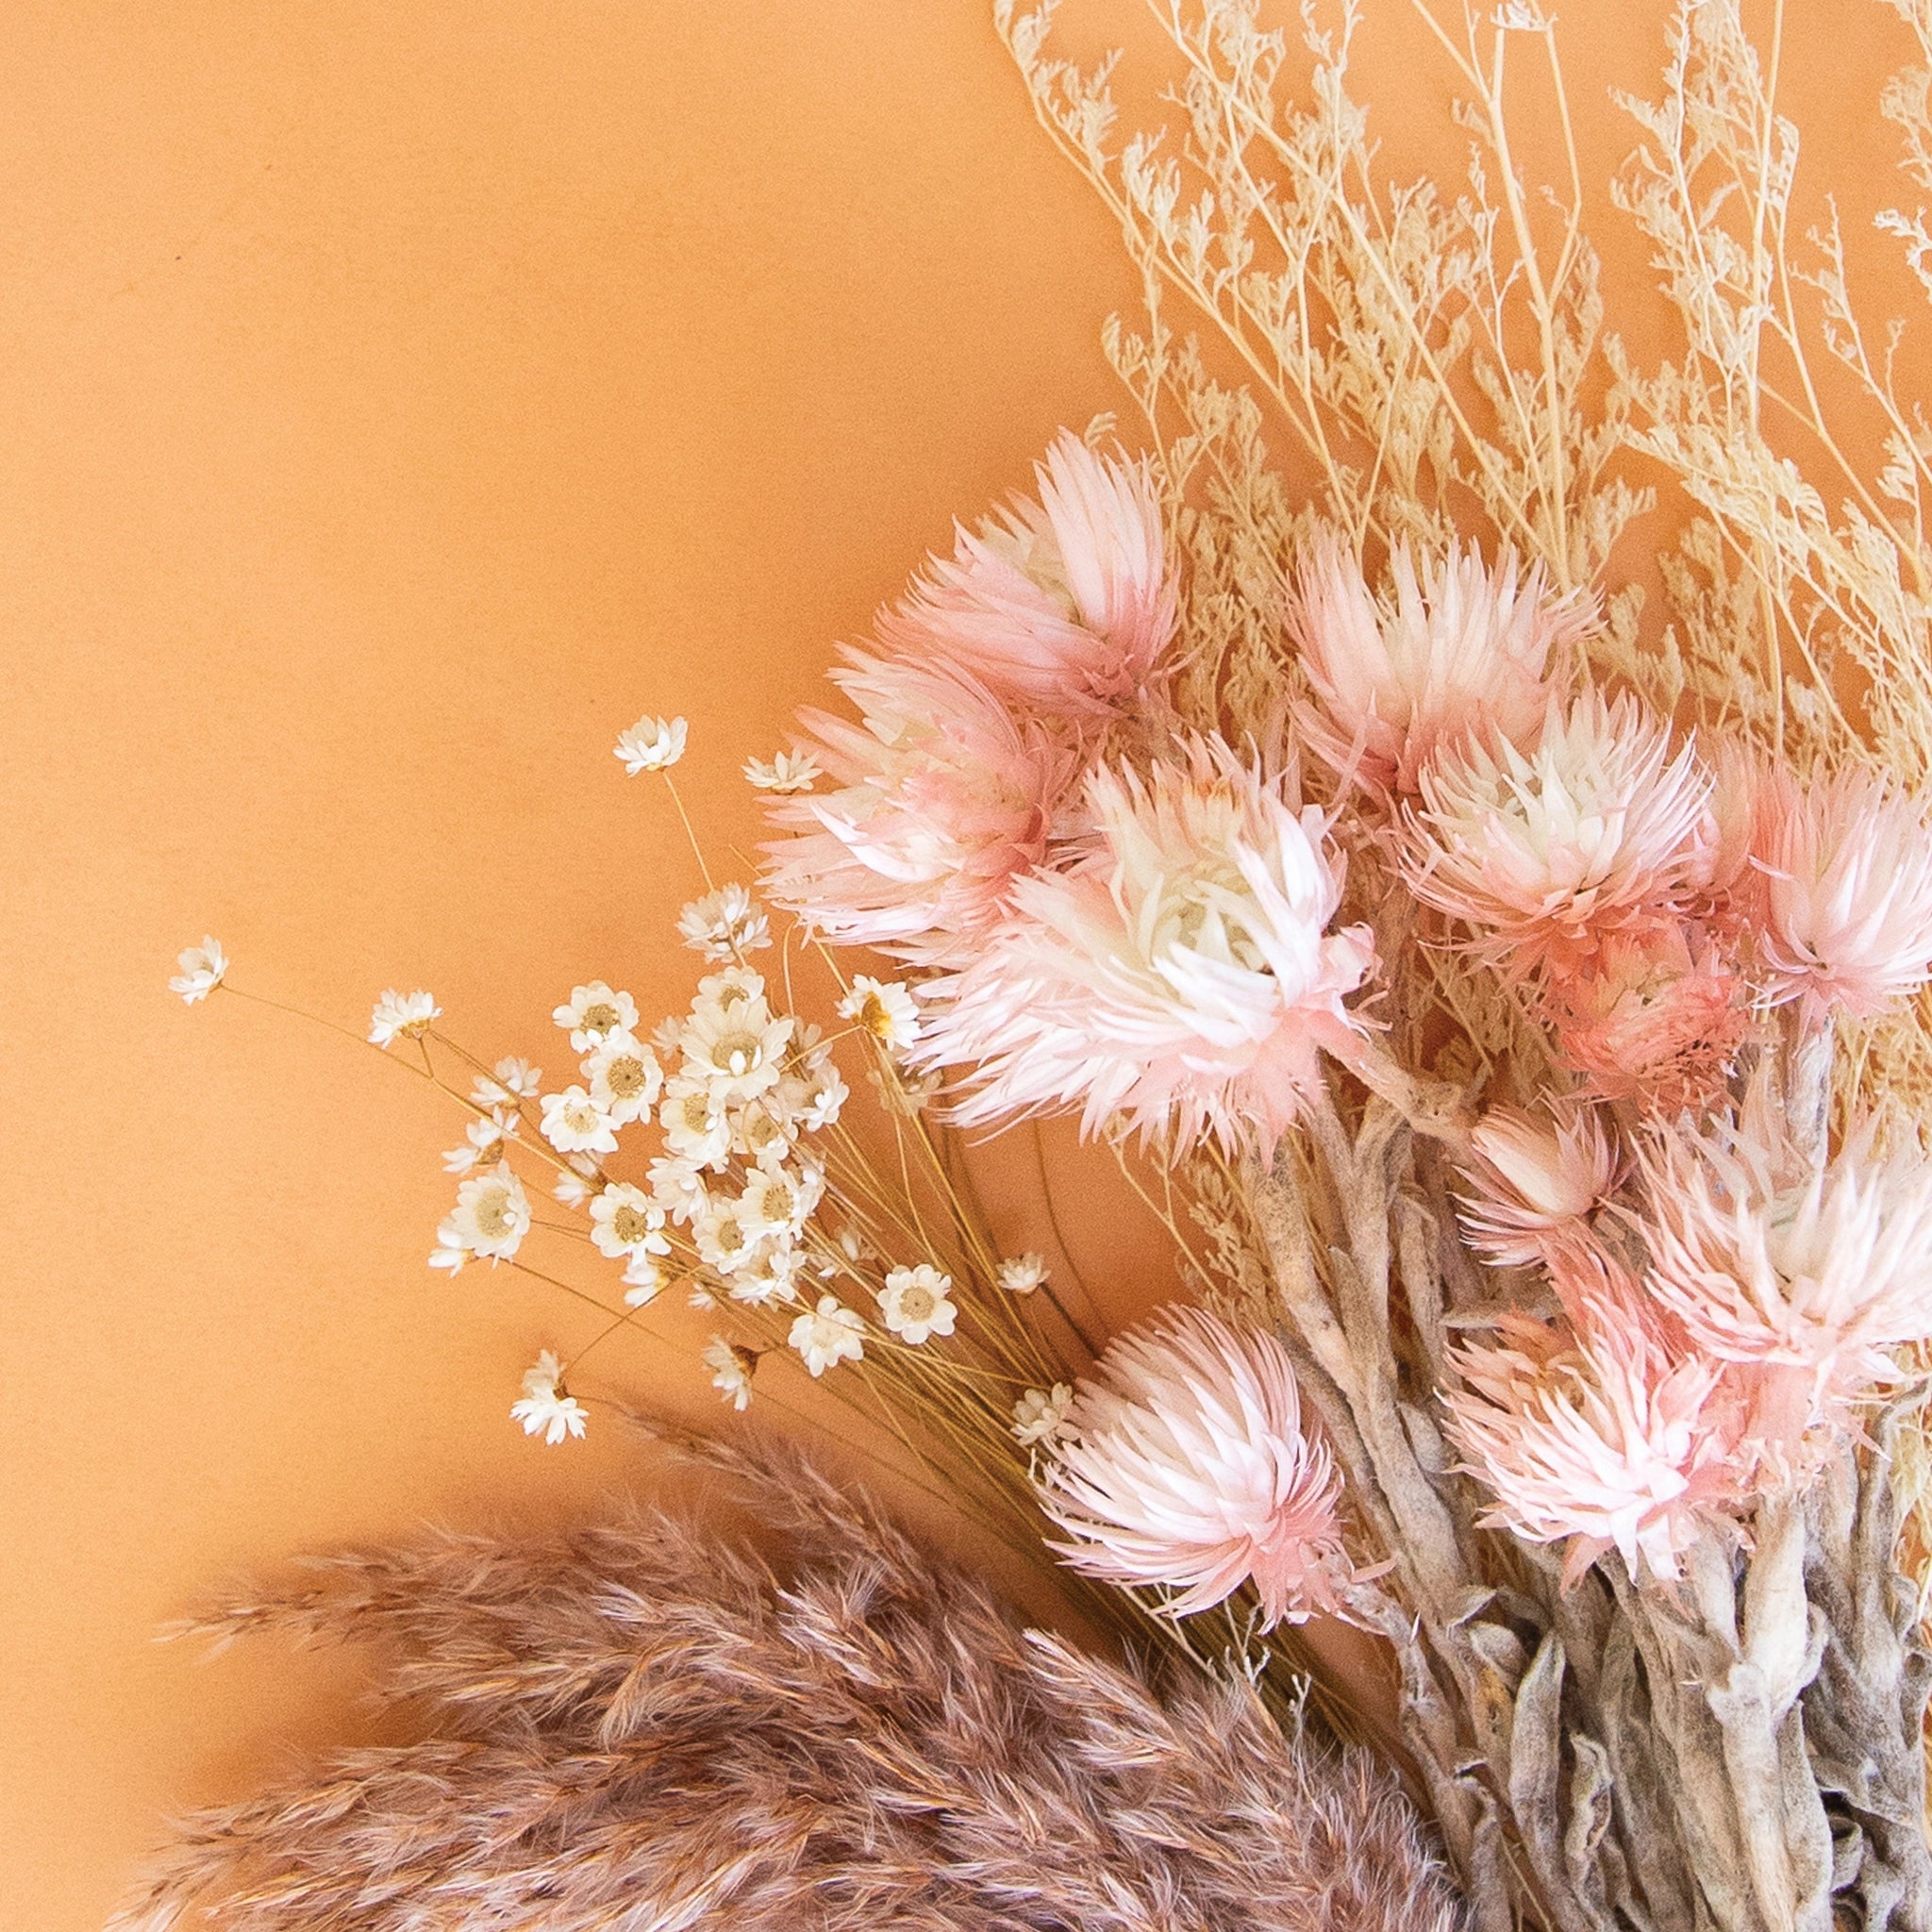 On an orange background is an assortment of dried florals. 